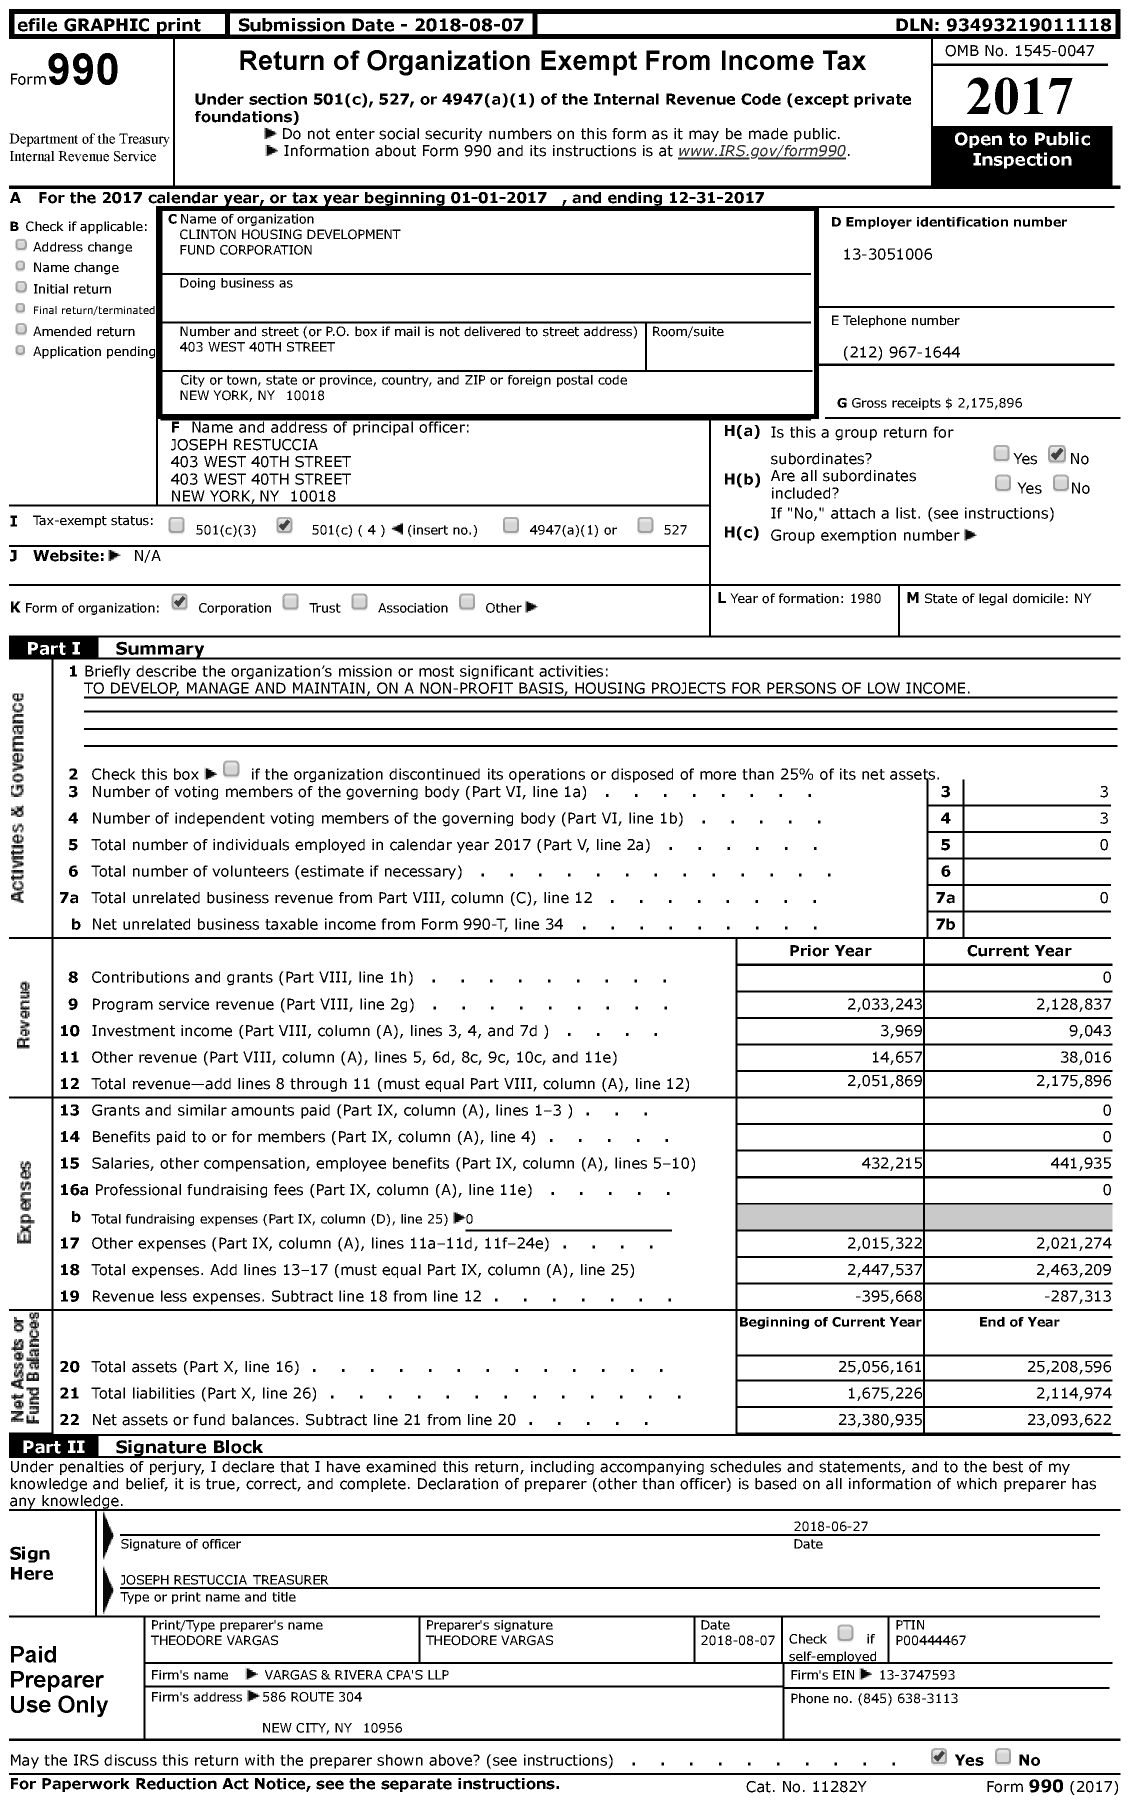 Image of first page of 2017 Form 990 for Clinton Housing Development Fund Corporation (CHDC)